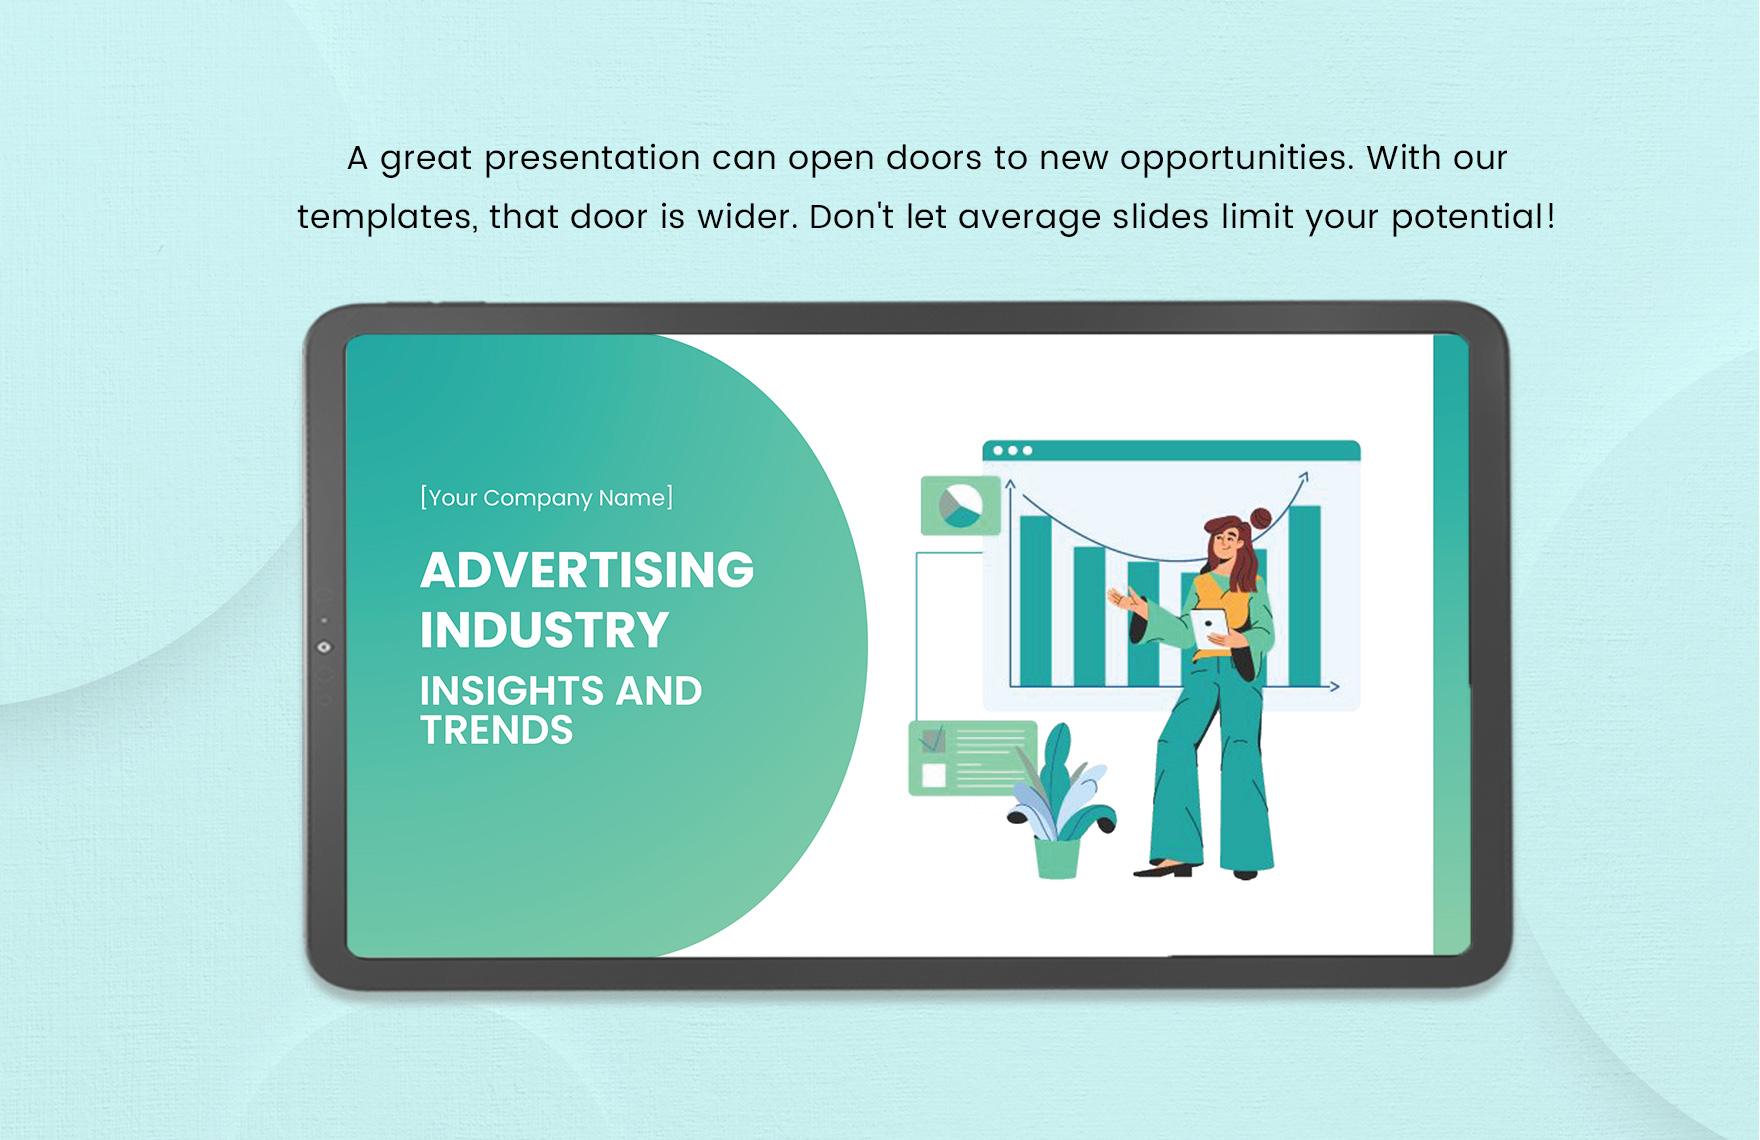 Advertising Industry Insights and Trends Presentation Template